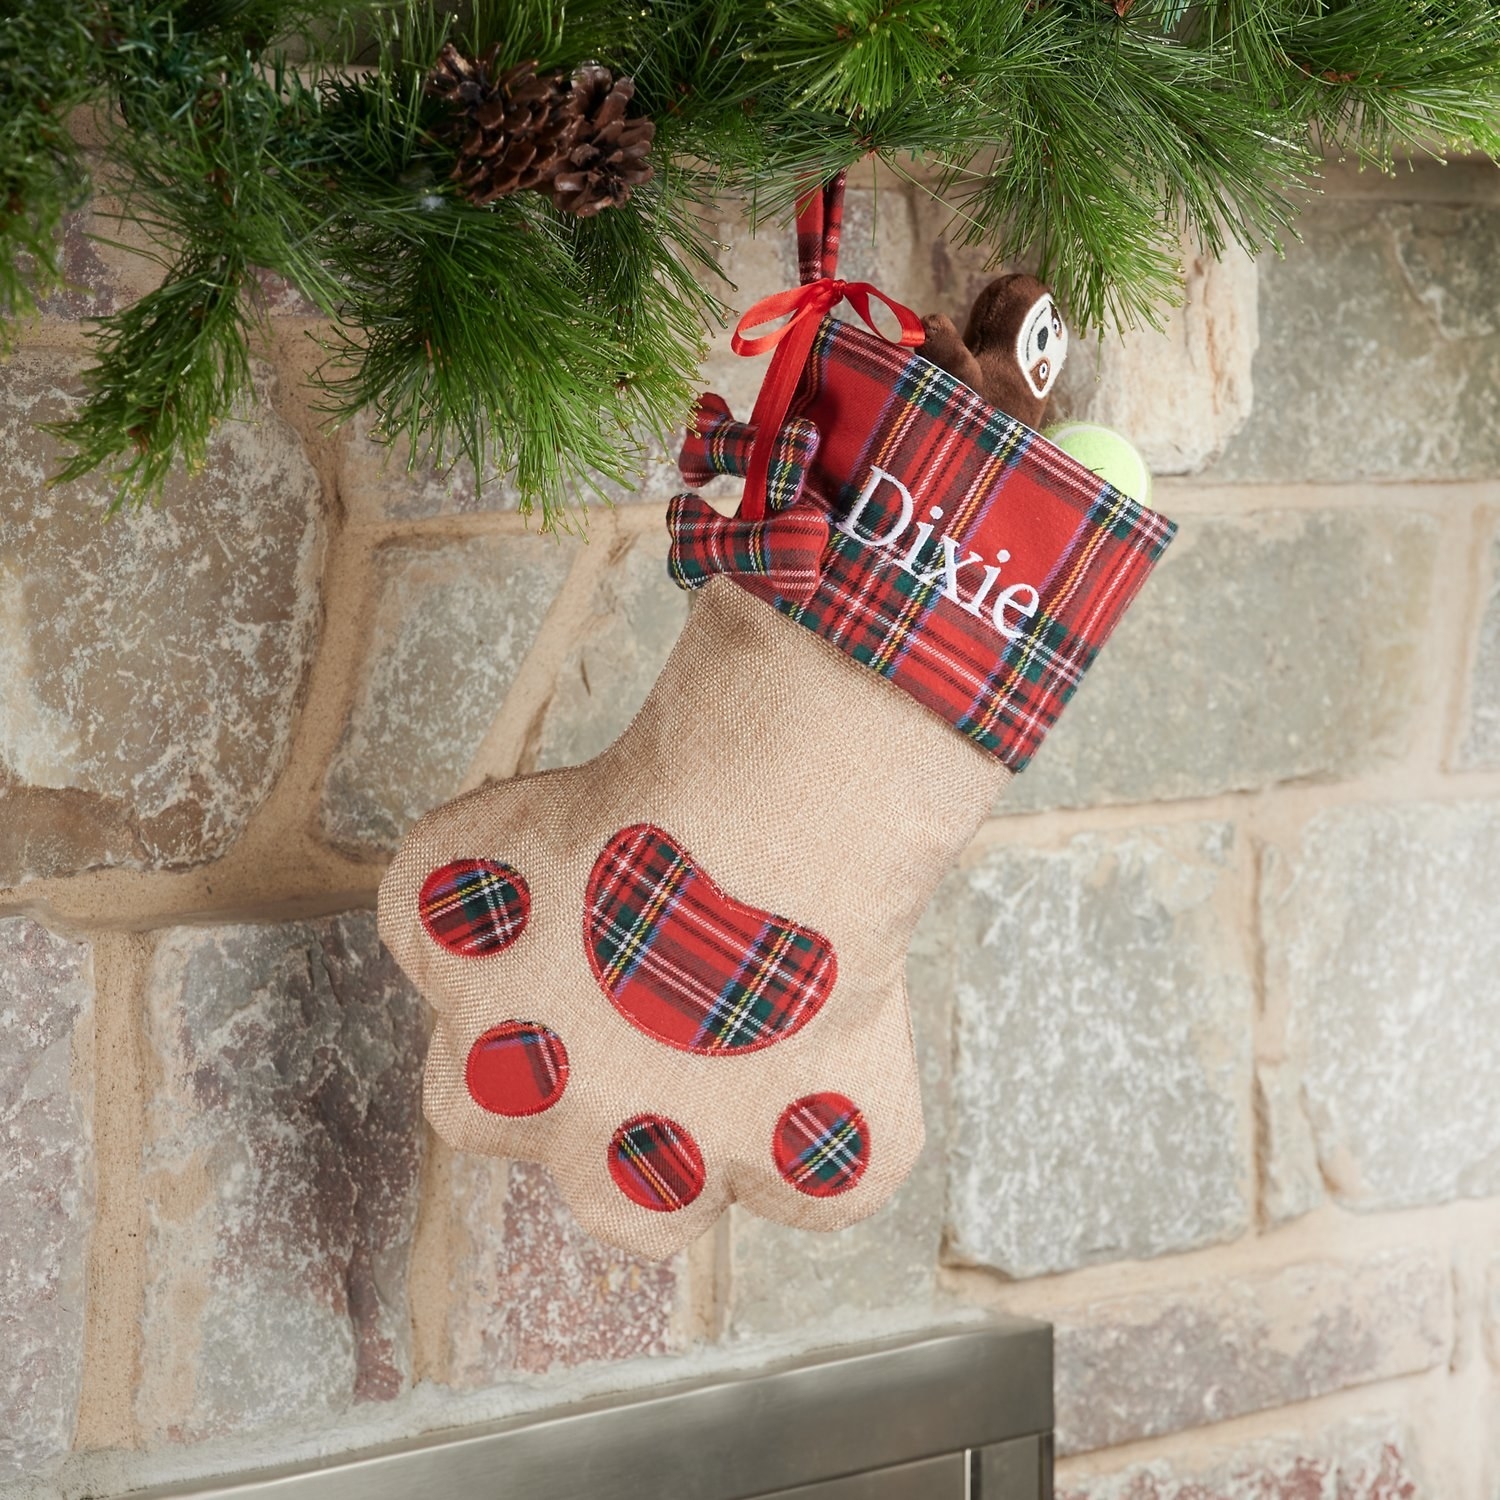 A paw-shaped stocking hanging on a mantle.